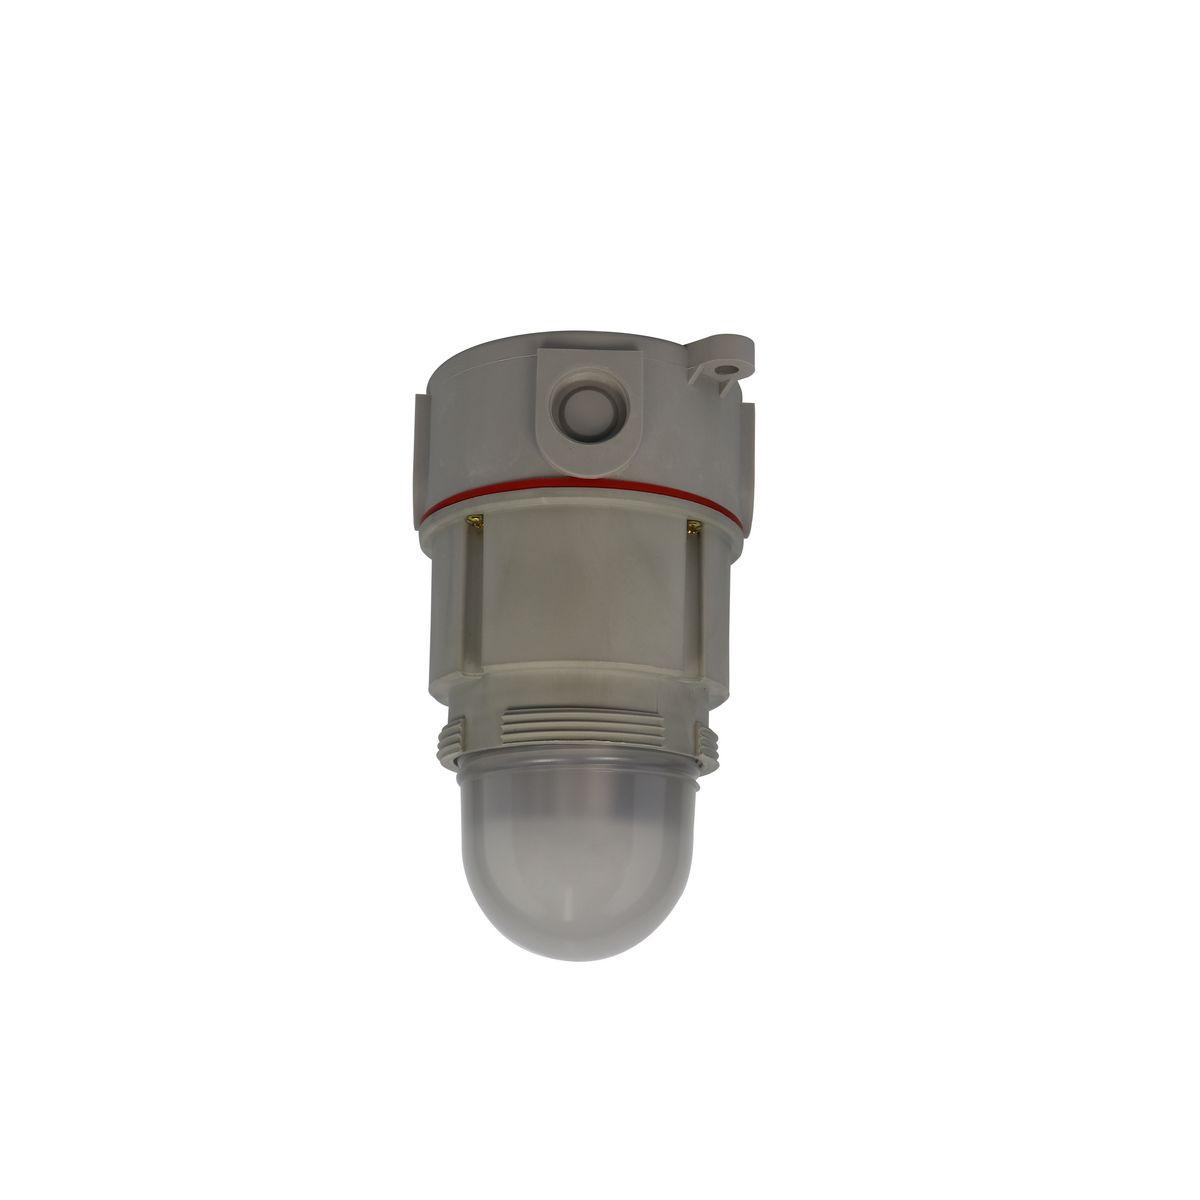 Hubbell NVL230X8N NVL Series Non-Metallic Corrosion Resistant Hazardous Location LED Fixture, M20 Ceiling Mount  ; Energy and labor-saving LED ; High Efﬁcacy (lumens per watt) ; Compact Size ; Type 3, 4, & 4X Rated ; IP66 Marine Rated ; ABS Approved ; Resists corrosive eff